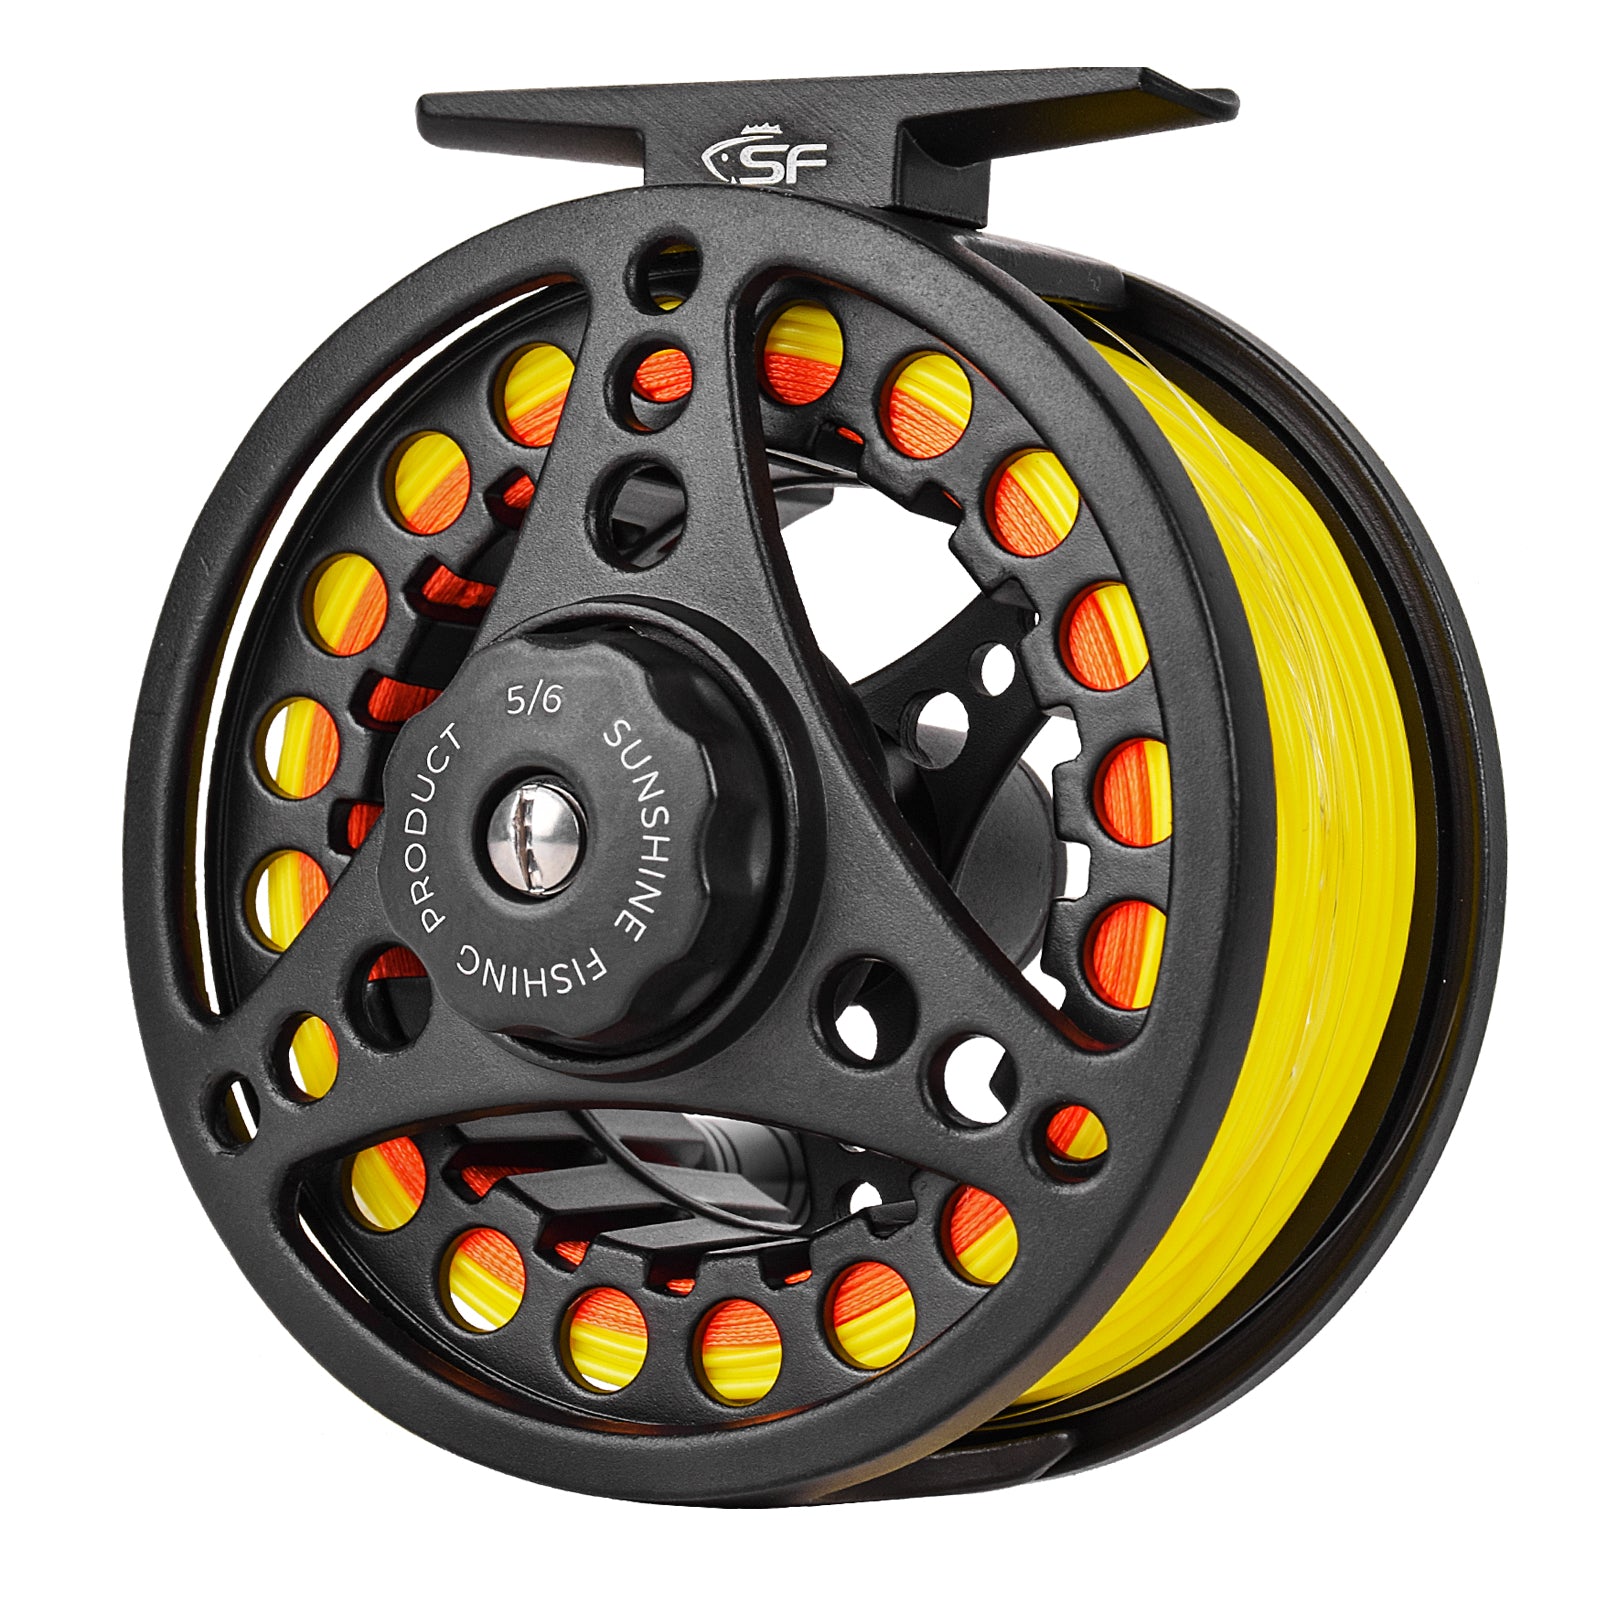 TFO Prism Cast Large Arbor Fly Reel - 5/6wt - The Fly Shack Fly Fishing